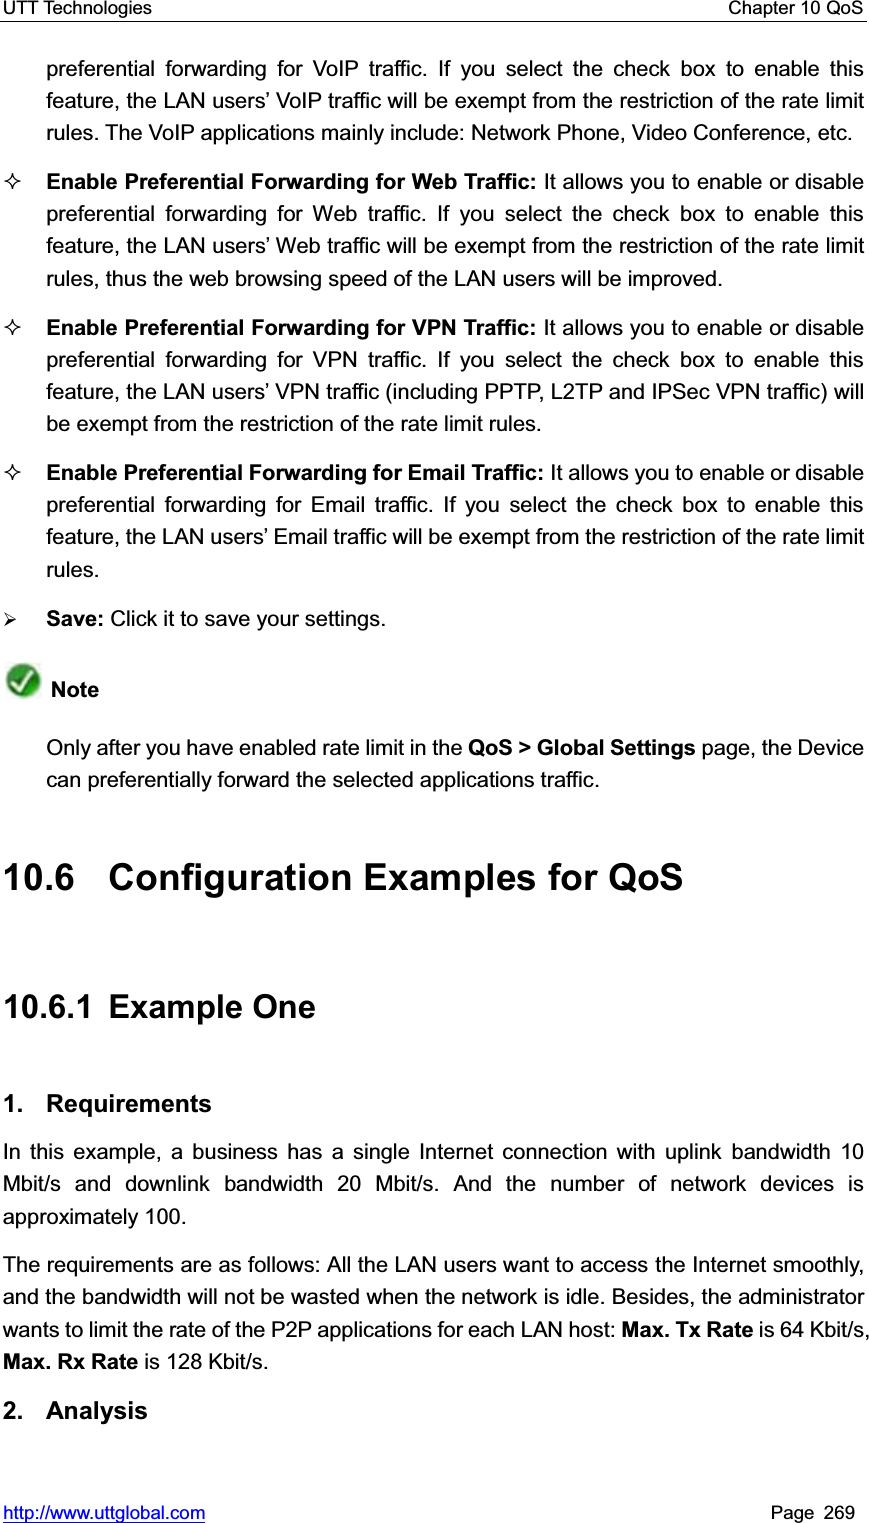 UTT Technologies    Chapter 10 QoS   http://www.uttglobal.com Page 269 preferential forwarding for VoIP traffic. If you select the check box to enable this feature, the LAN userV¶ VoIP traffic will be exempt from the restriction of the rate limit rules. The VoIP applications mainly include: Network Phone, Video Conference, etc. Enable Preferential Forwarding for Web Traffic: It allows you to enable or disable preferential forwarding for Web traffic. If you select the check box to enable this feature, the LAN userV¶ Web traffic will be exempt from the restriction of the rate limit rules, thus the web browsing speed of the LAN users will be improved. Enable Preferential Forwarding for VPN Traffic: It allows you to enable or disable preferential forwarding for VPN traffic. If you select the check box to enable this feature, the LAN userV¶ VPN traffic (including PPTP, L2TP and IPSec VPN traffic) will be exempt from the restriction of the rate limit rules. Enable Preferential Forwarding for Email Traffic: It allows you to enable or disable preferential forwarding for Email traffic. If you select the check box to enable this feature, the LAN userV¶ Email traffic will be exempt from the restriction of the rate limit rules. ¾Save: Click it to save your settings.NoteOnly after you have enabled rate limit in the QoS &gt; Global Settings page, the Device can preferentially forward the selected applications traffic. 10.6  Configuration Examples for QoS 10.6.1 Example One 1. Requirements In this example, a business has a single Internet connection with uplink bandwidth 10 Mbit/s and downlink bandwidth 20 Mbit/s. And the number of network devices is approximately 100. The requirements are as follows: All the LAN users want to access the Internet smoothly, and the bandwidth will not be wasted when the network is idle. Besides, the administrator wants to limit the rate of the P2P applications for each LAN host: Max. Tx Rate is 64 Kbit/s, Max. Rx Rate is 128 Kbit/s. 2. Analysis 